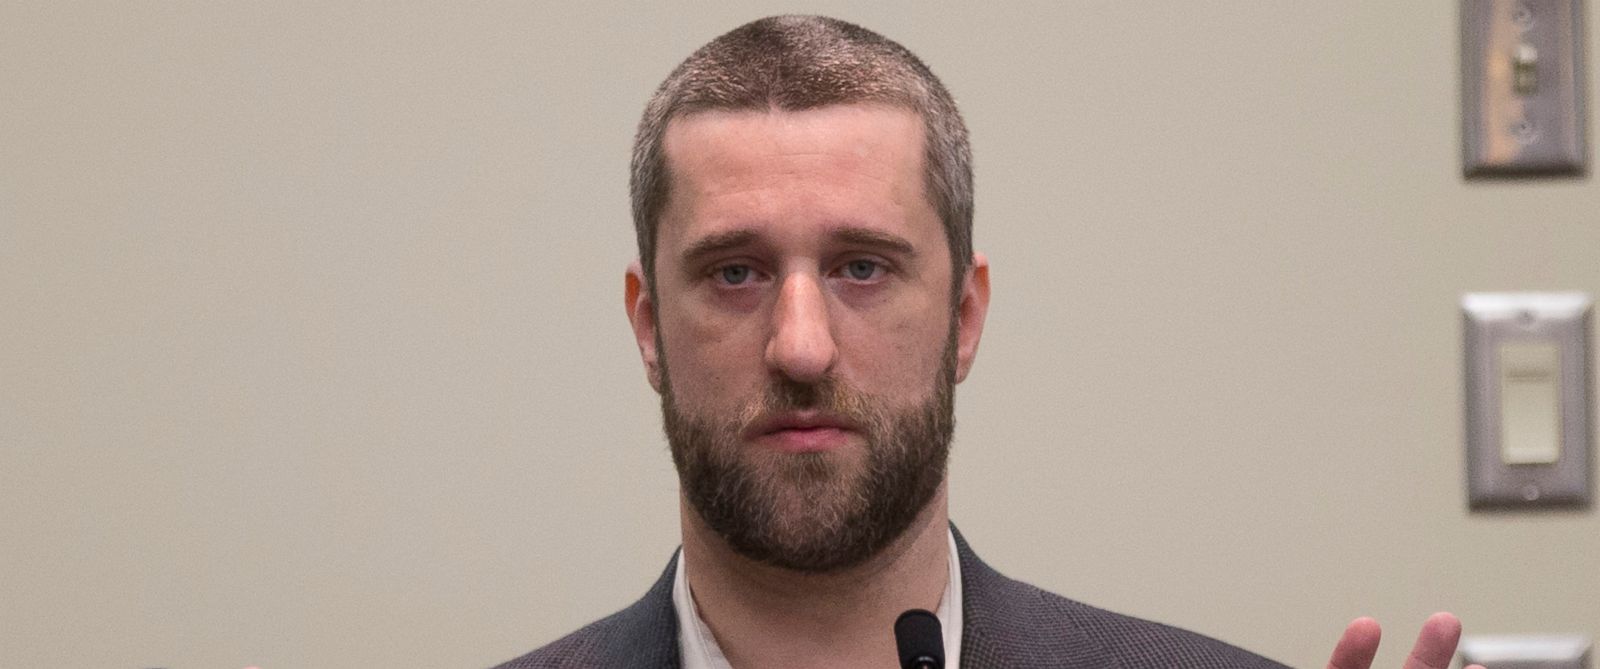 Dustin Diamond, Who Played Screech on 'Saved by the Bell,' Booked in Wisconsin Jail - ABC News